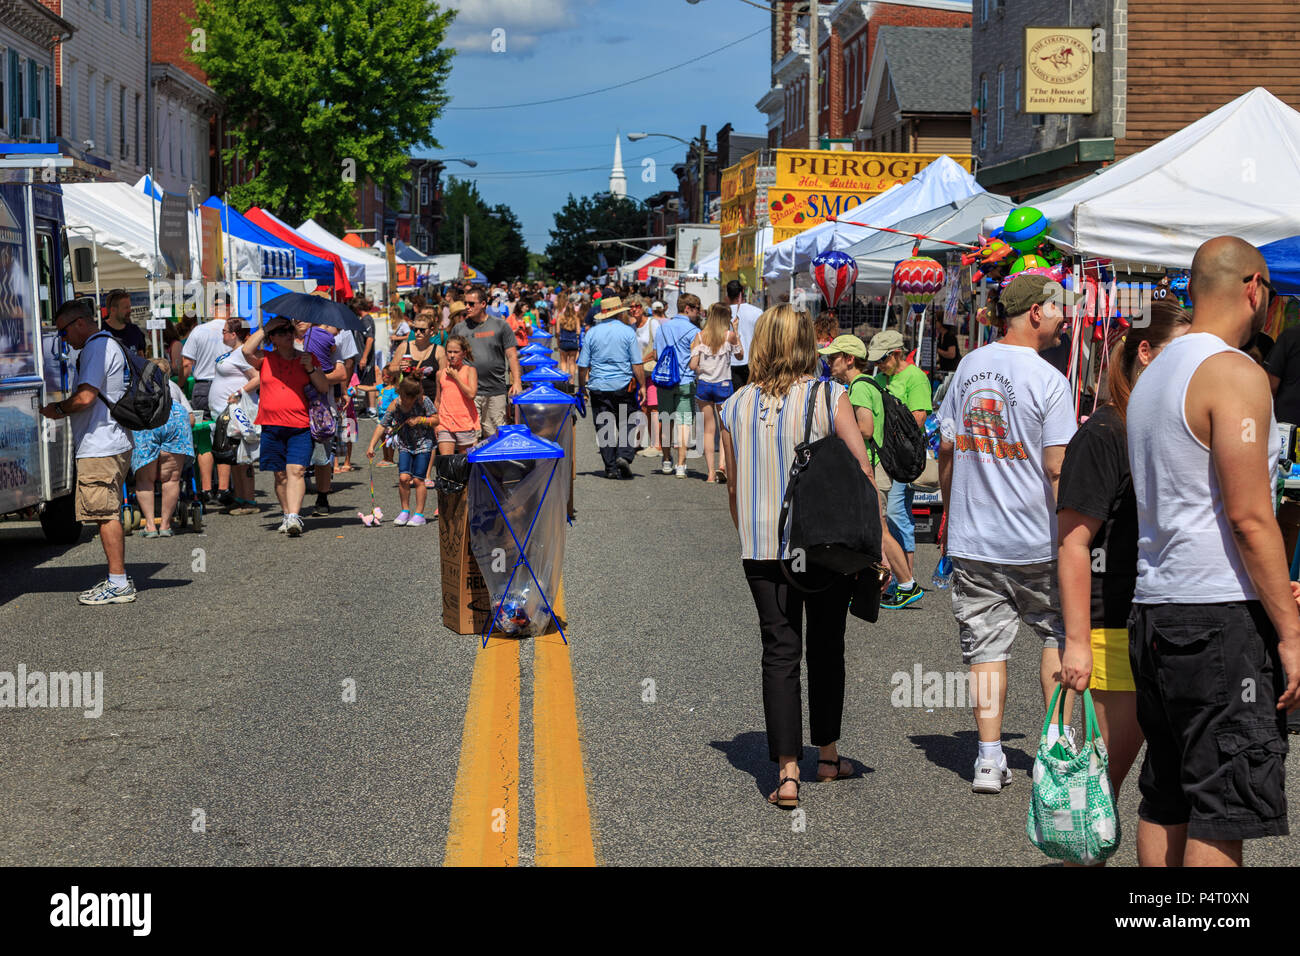 Mechanicsburg, PA, USA - June 21, 2018: A large crowd takes over